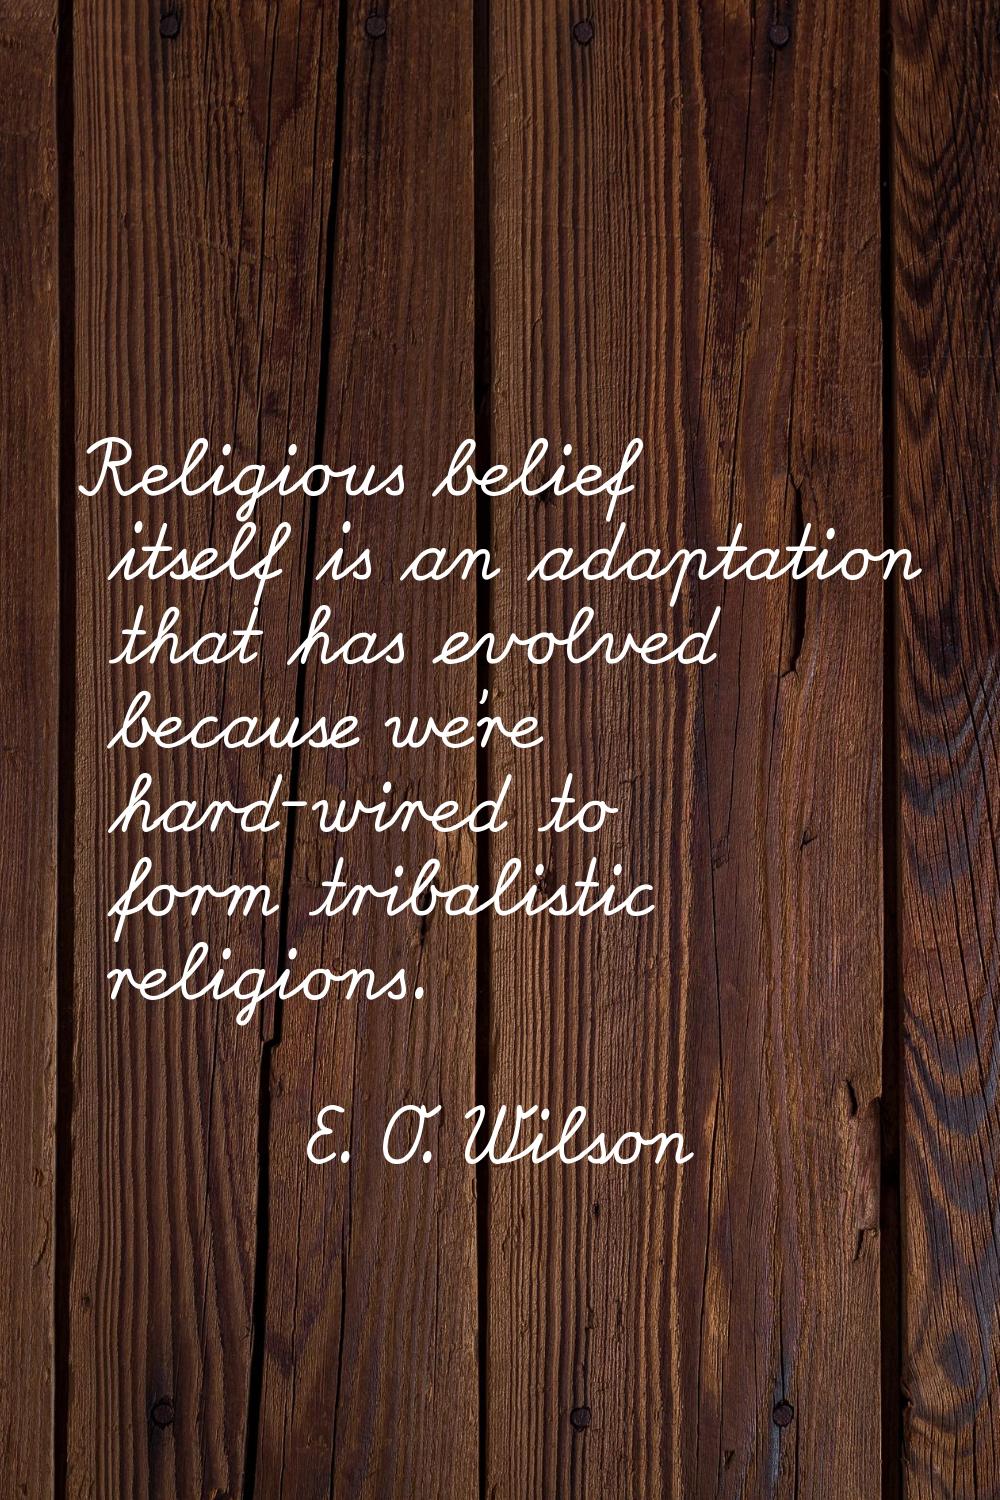 Religious belief itself is an adaptation that has evolved because we're hard-wired to form tribalis